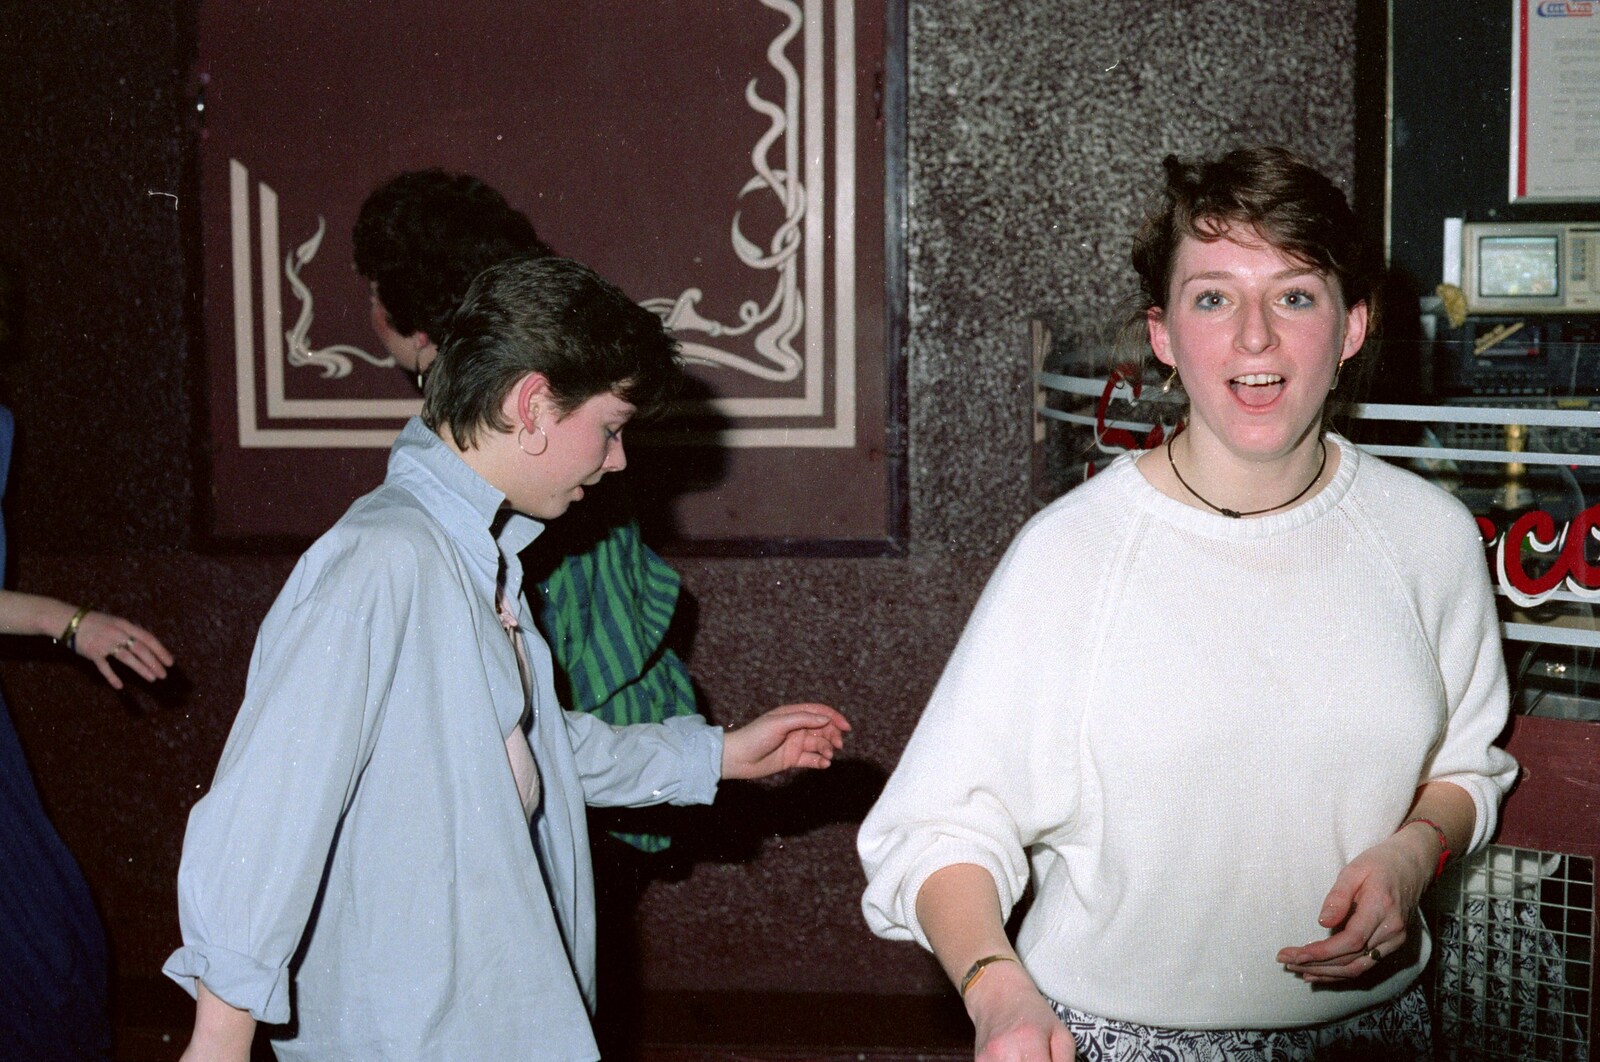 Someone vaguely familiar looks up from Uni: A Party in Snobs Nightclub, Mayflower Street, Plymouth - 18th October 1986